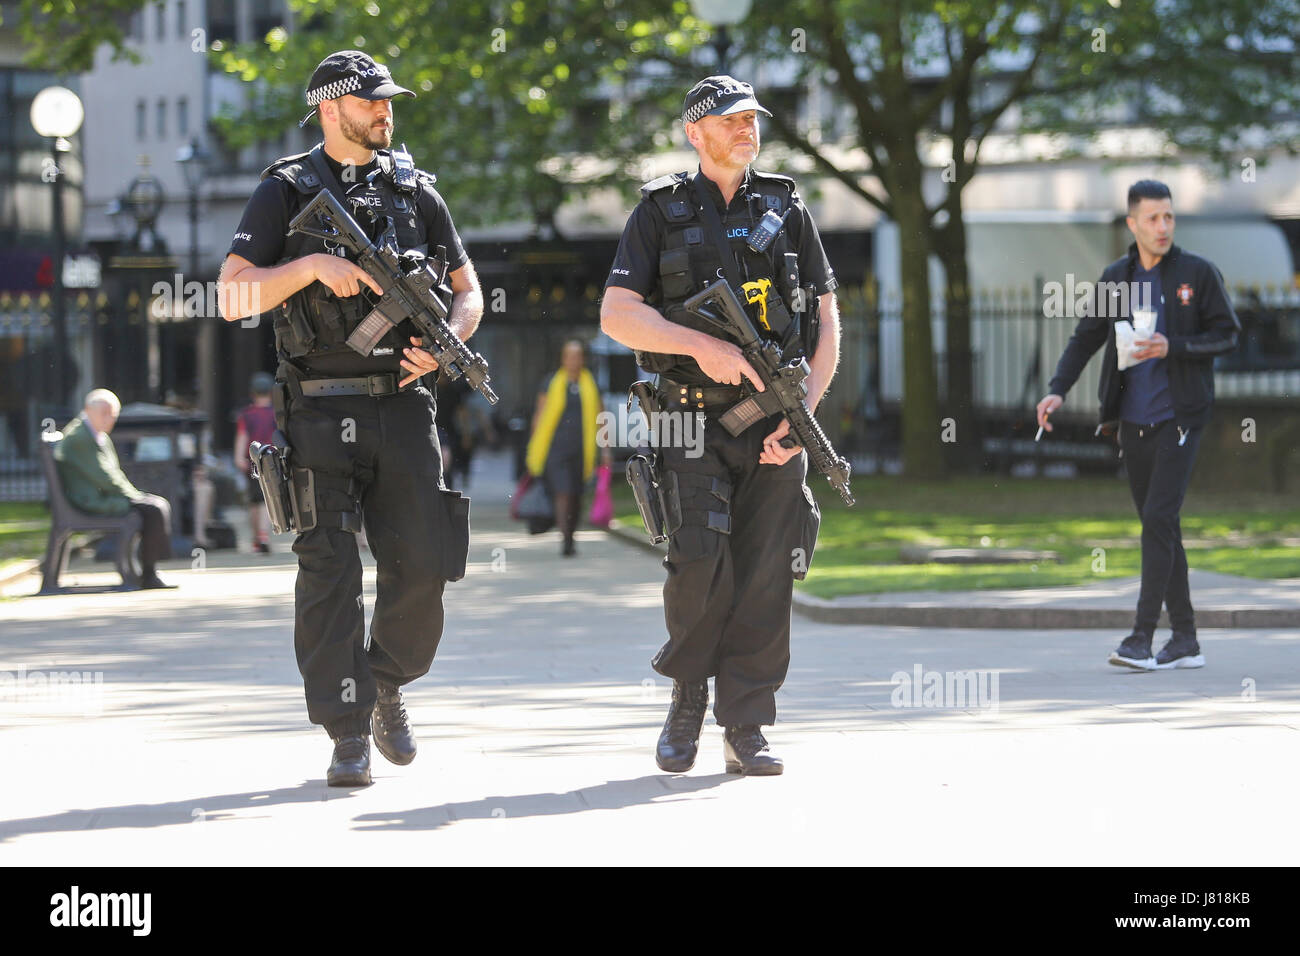 Armed UK police officers units patrolling city Britain Stock Photo